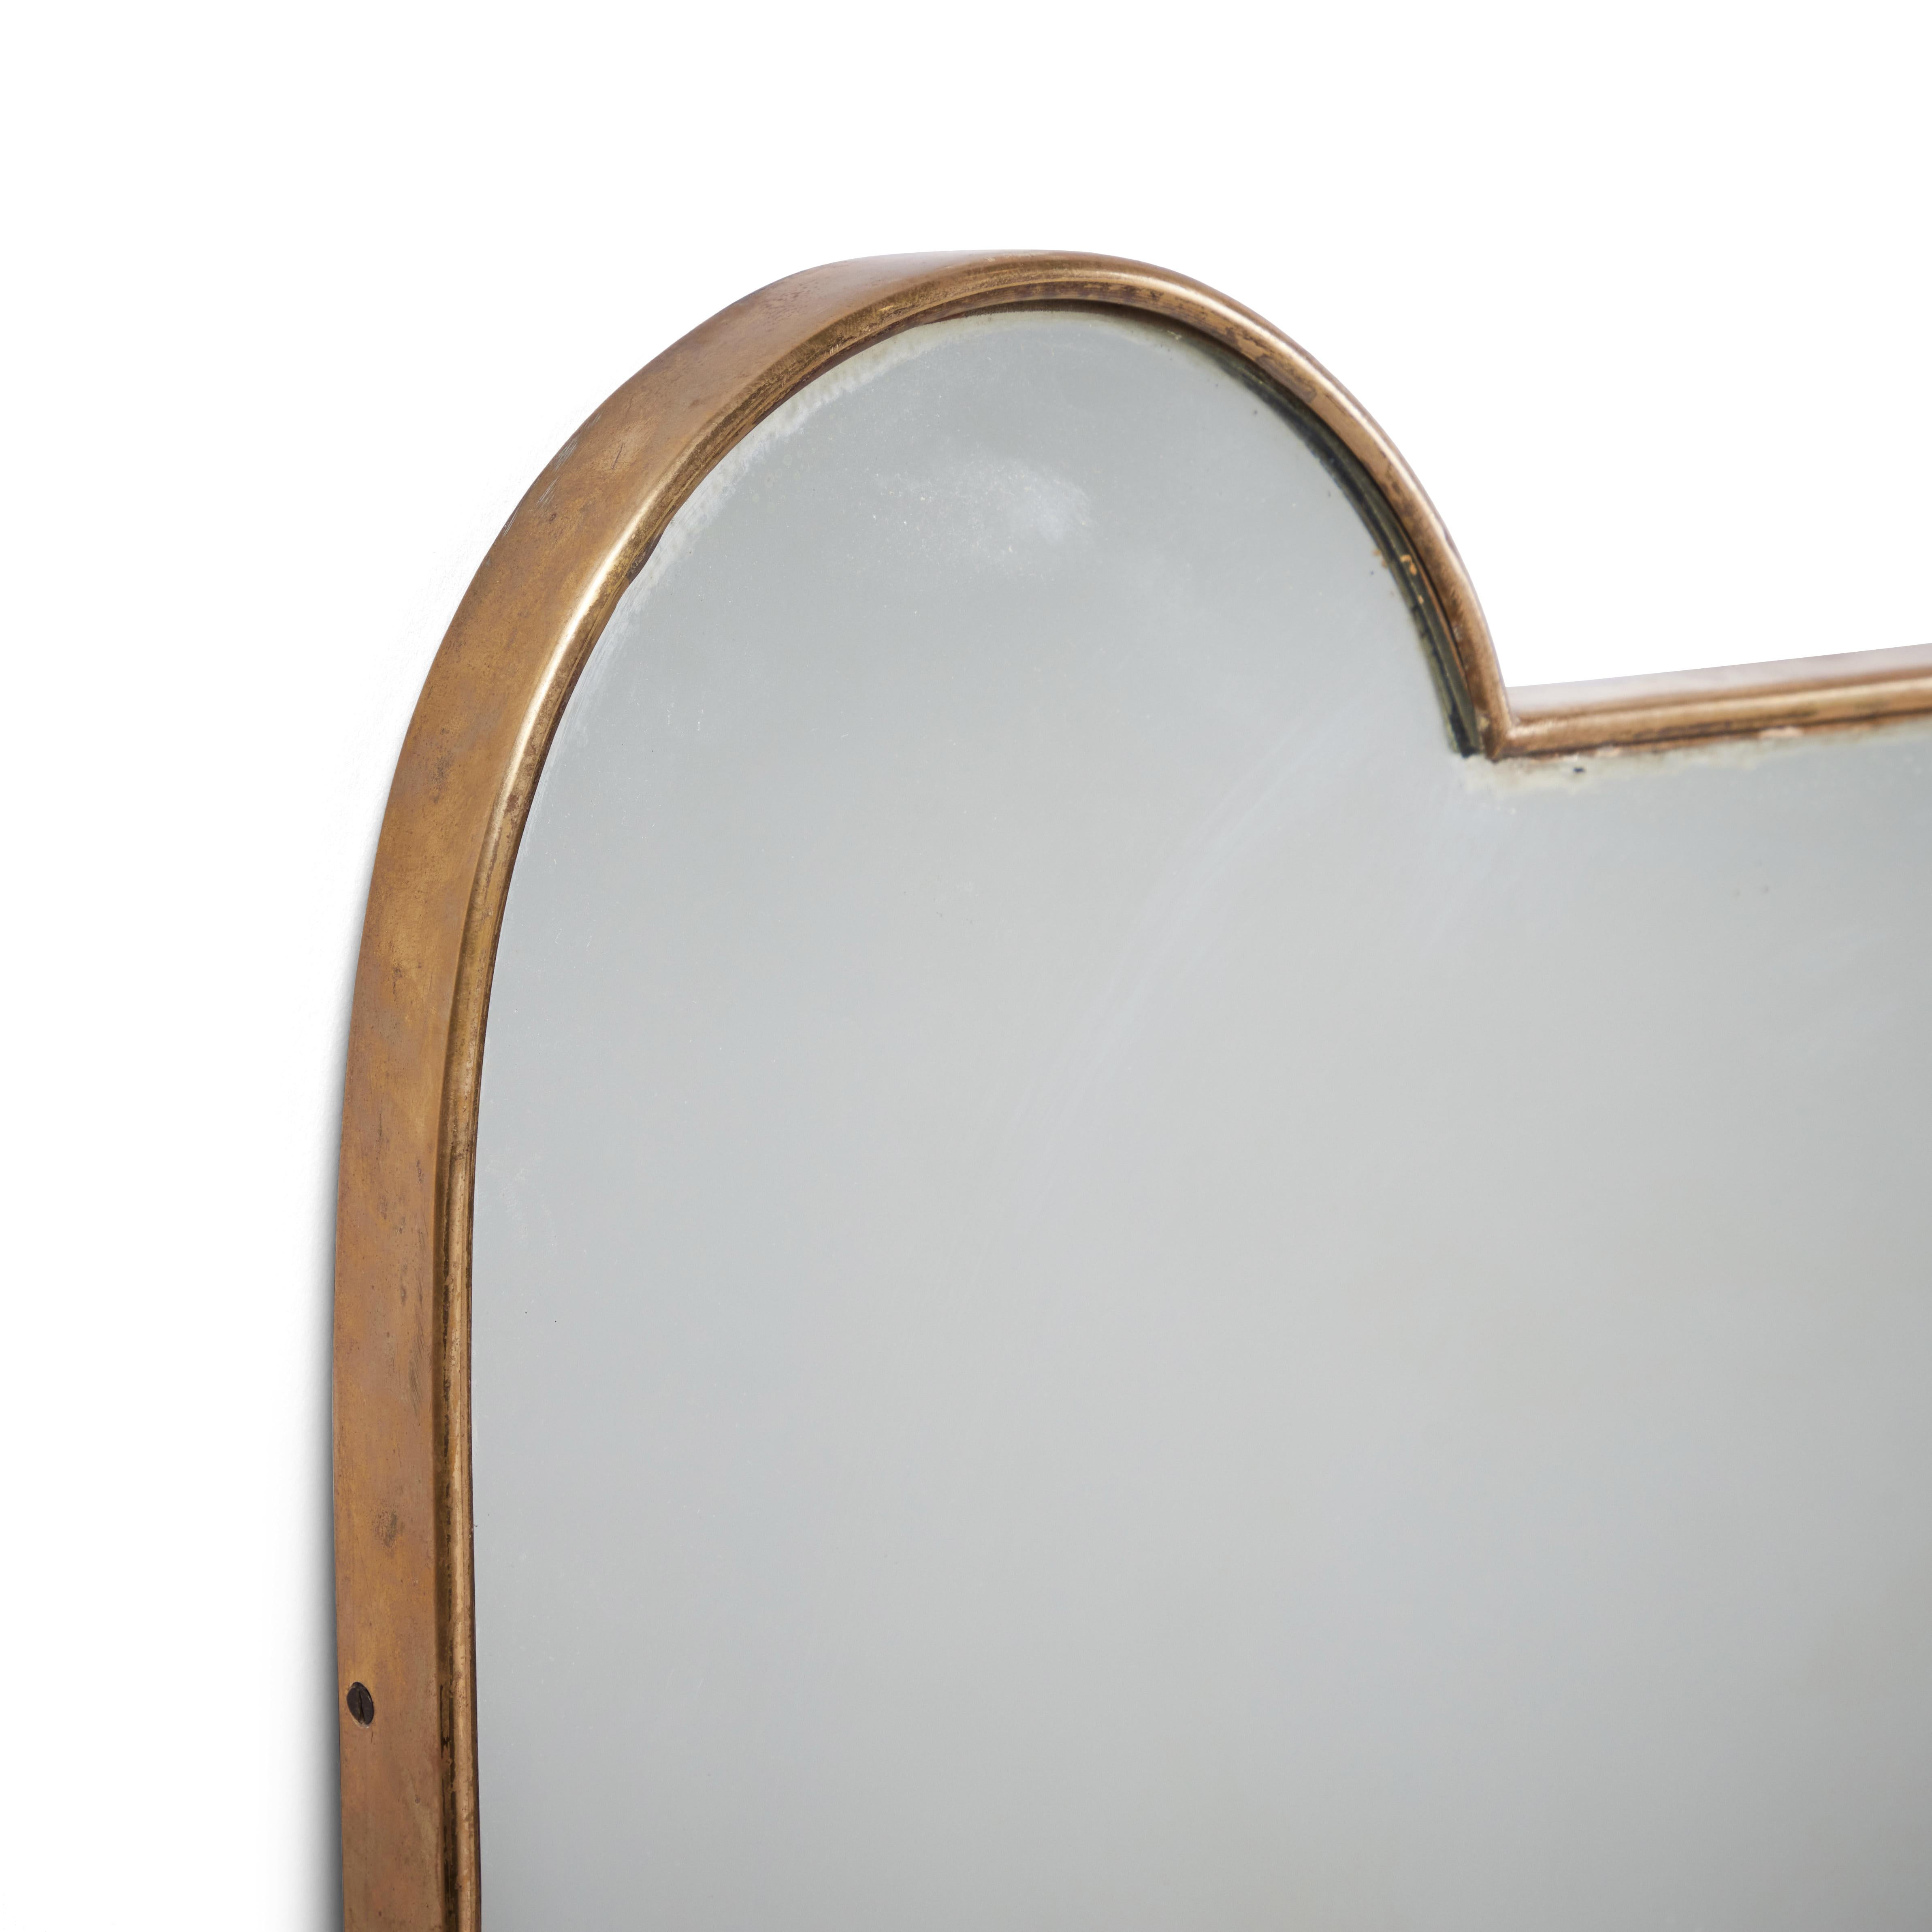 Italian patinated brass framed wall mirror. Made in Italy circa 1960s.